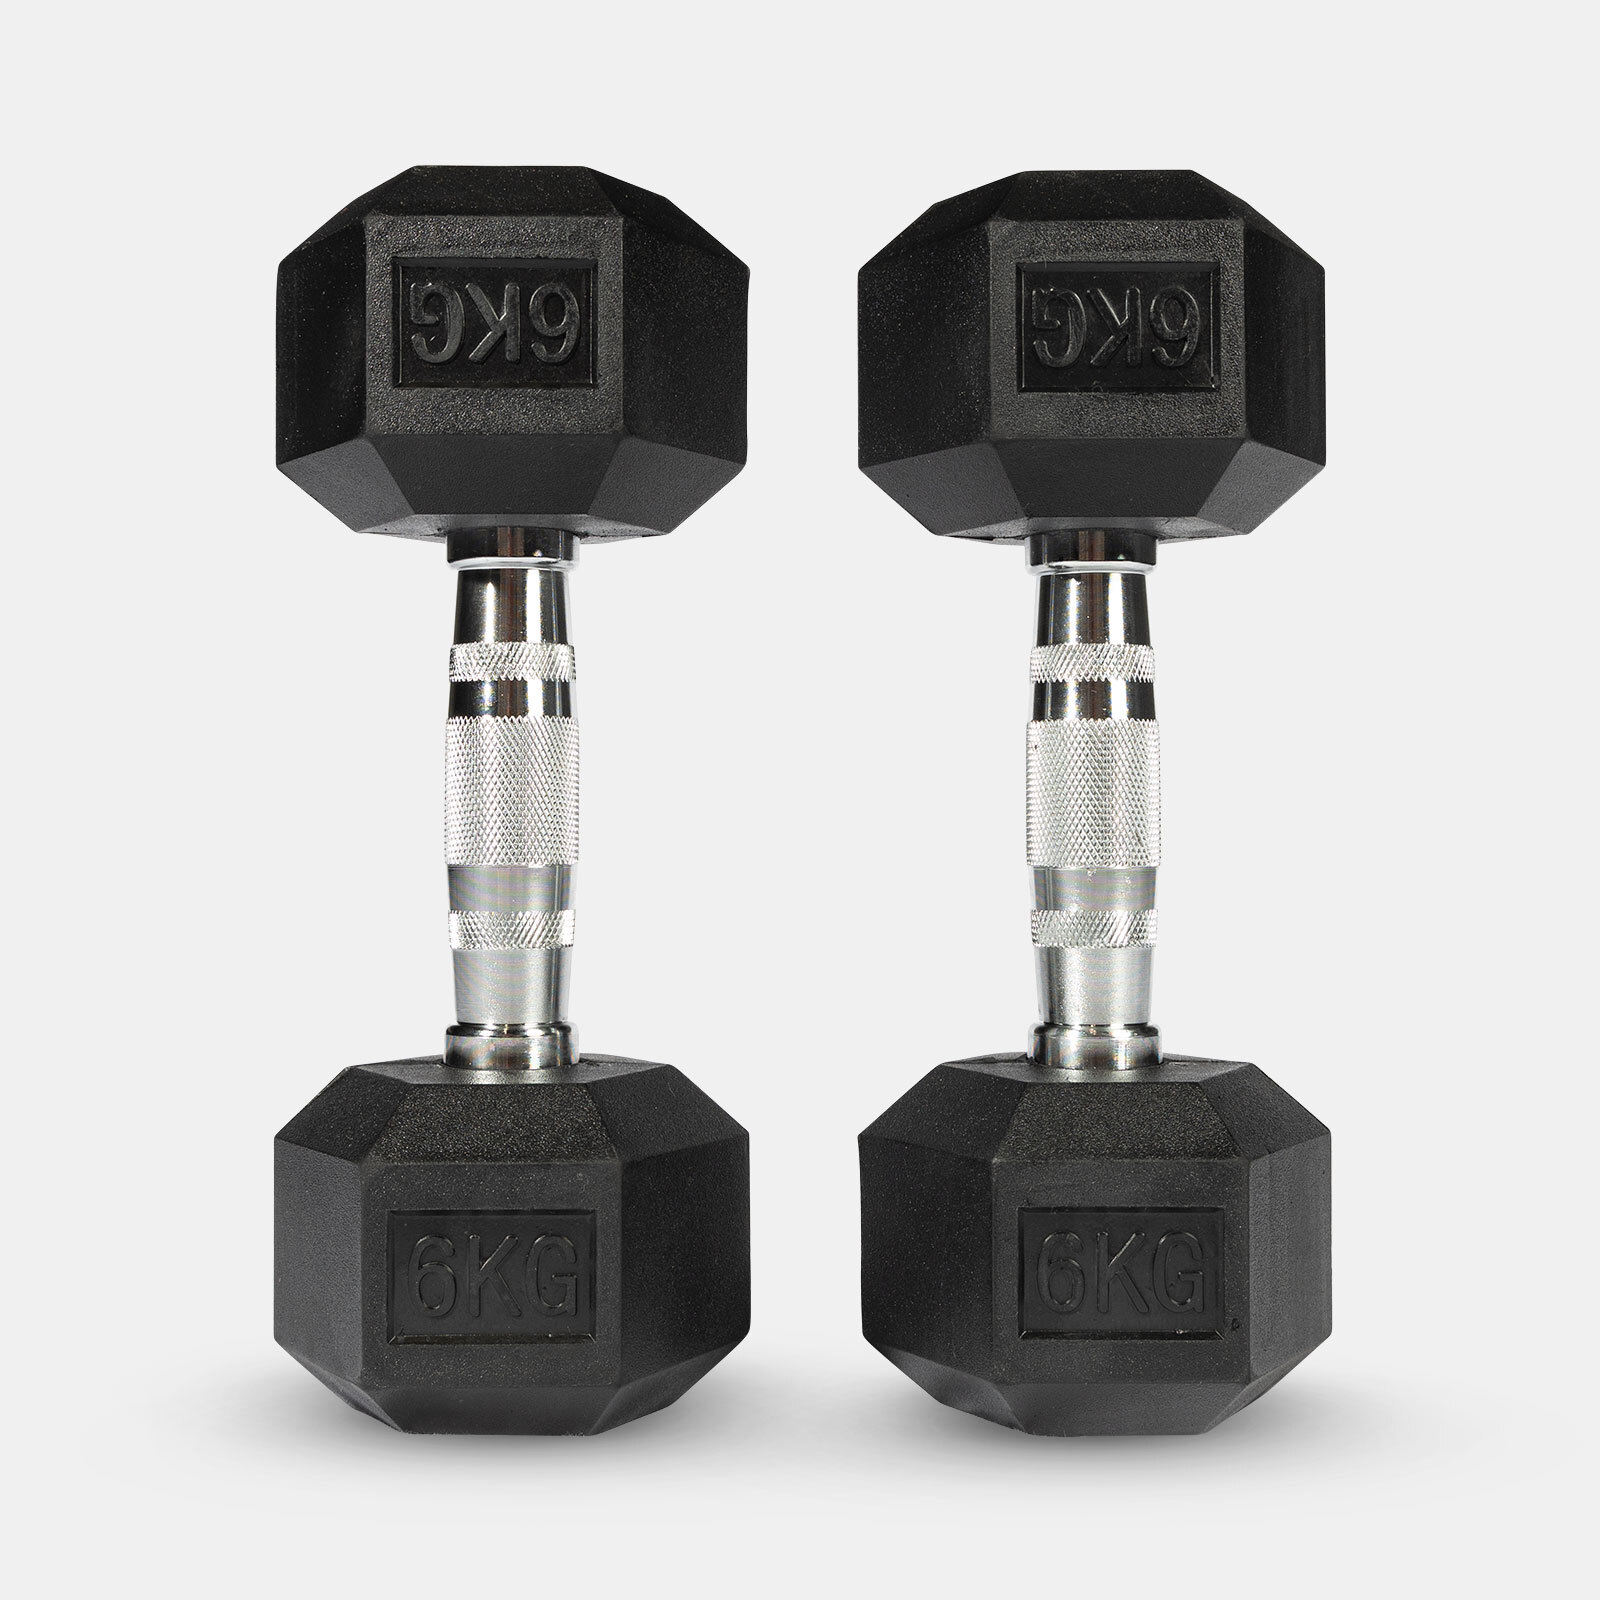 Clearance Hex Dumbbells (Unbranded) image